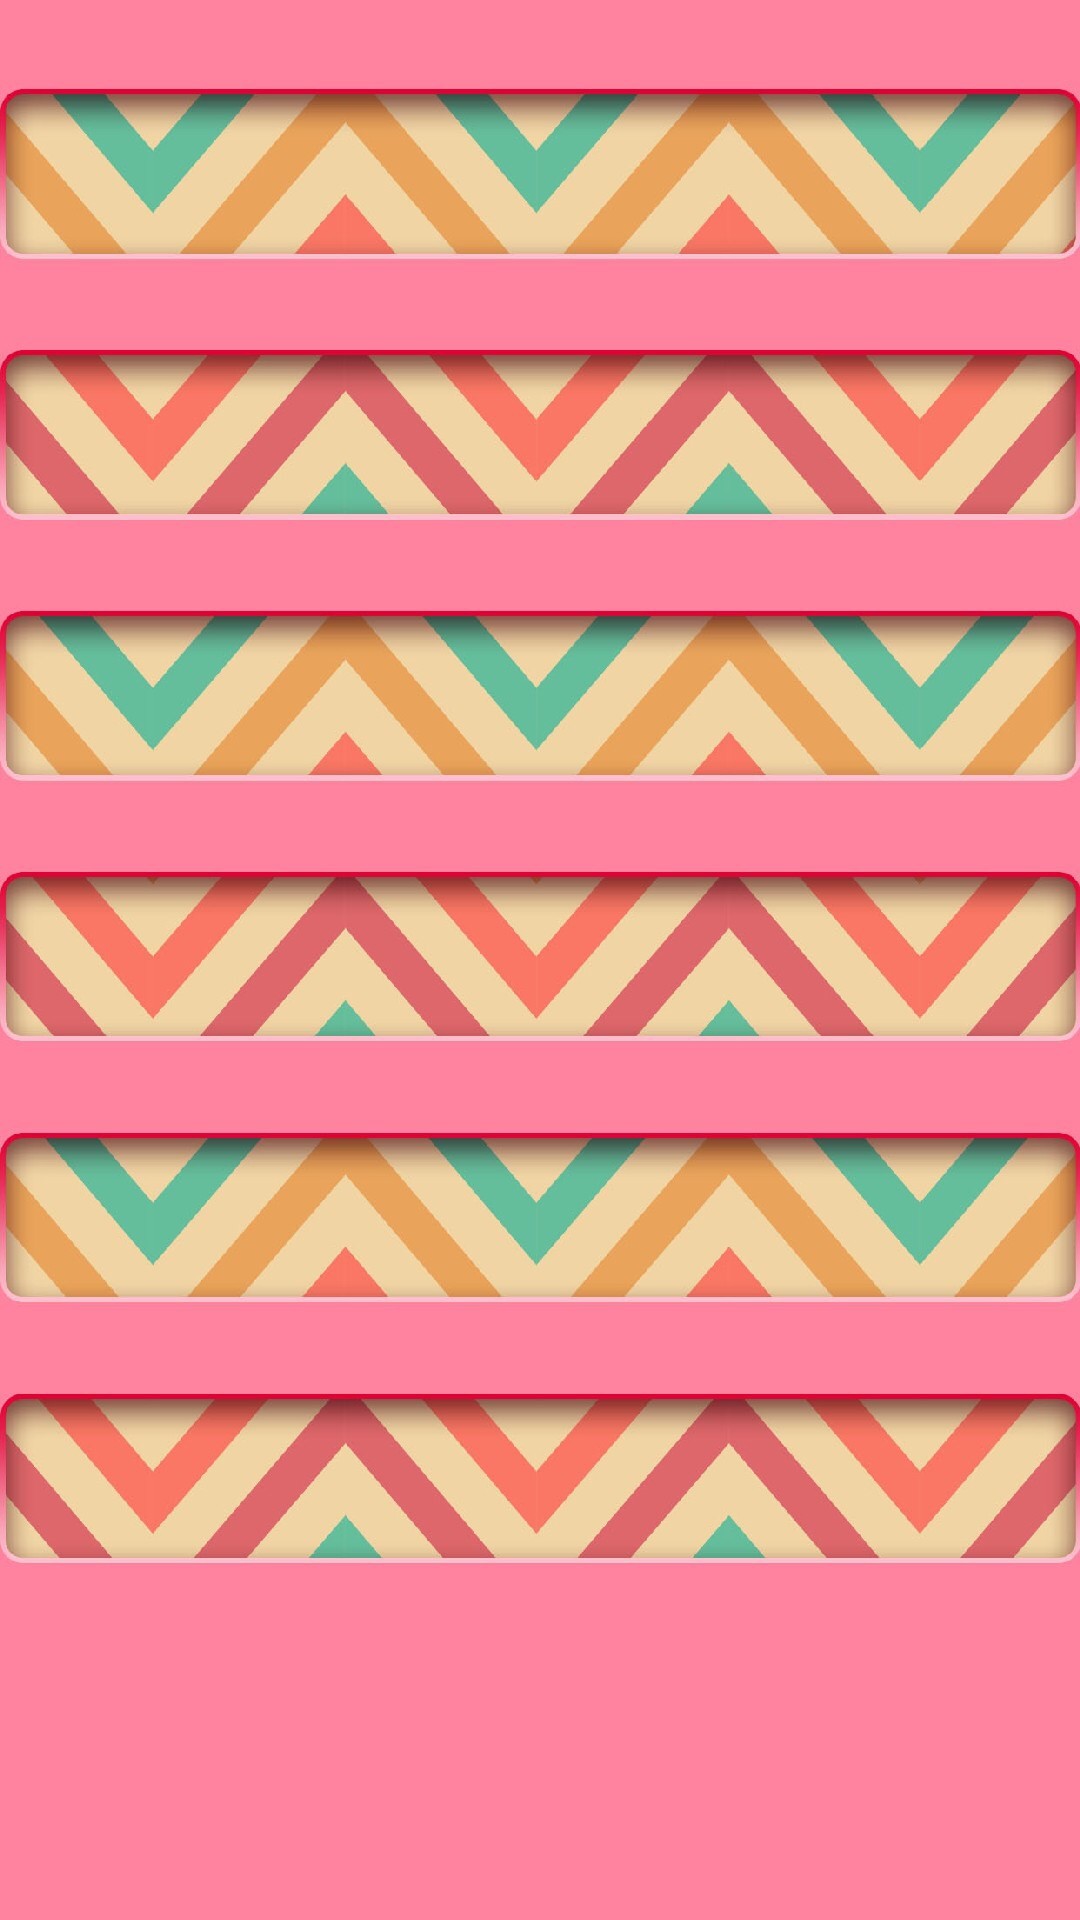 1080x1920 Flower Patterns Girly And App On Pinterest Shelves Colorful Zigzag Stripes  Pink Pattern Cool. lloyd ...